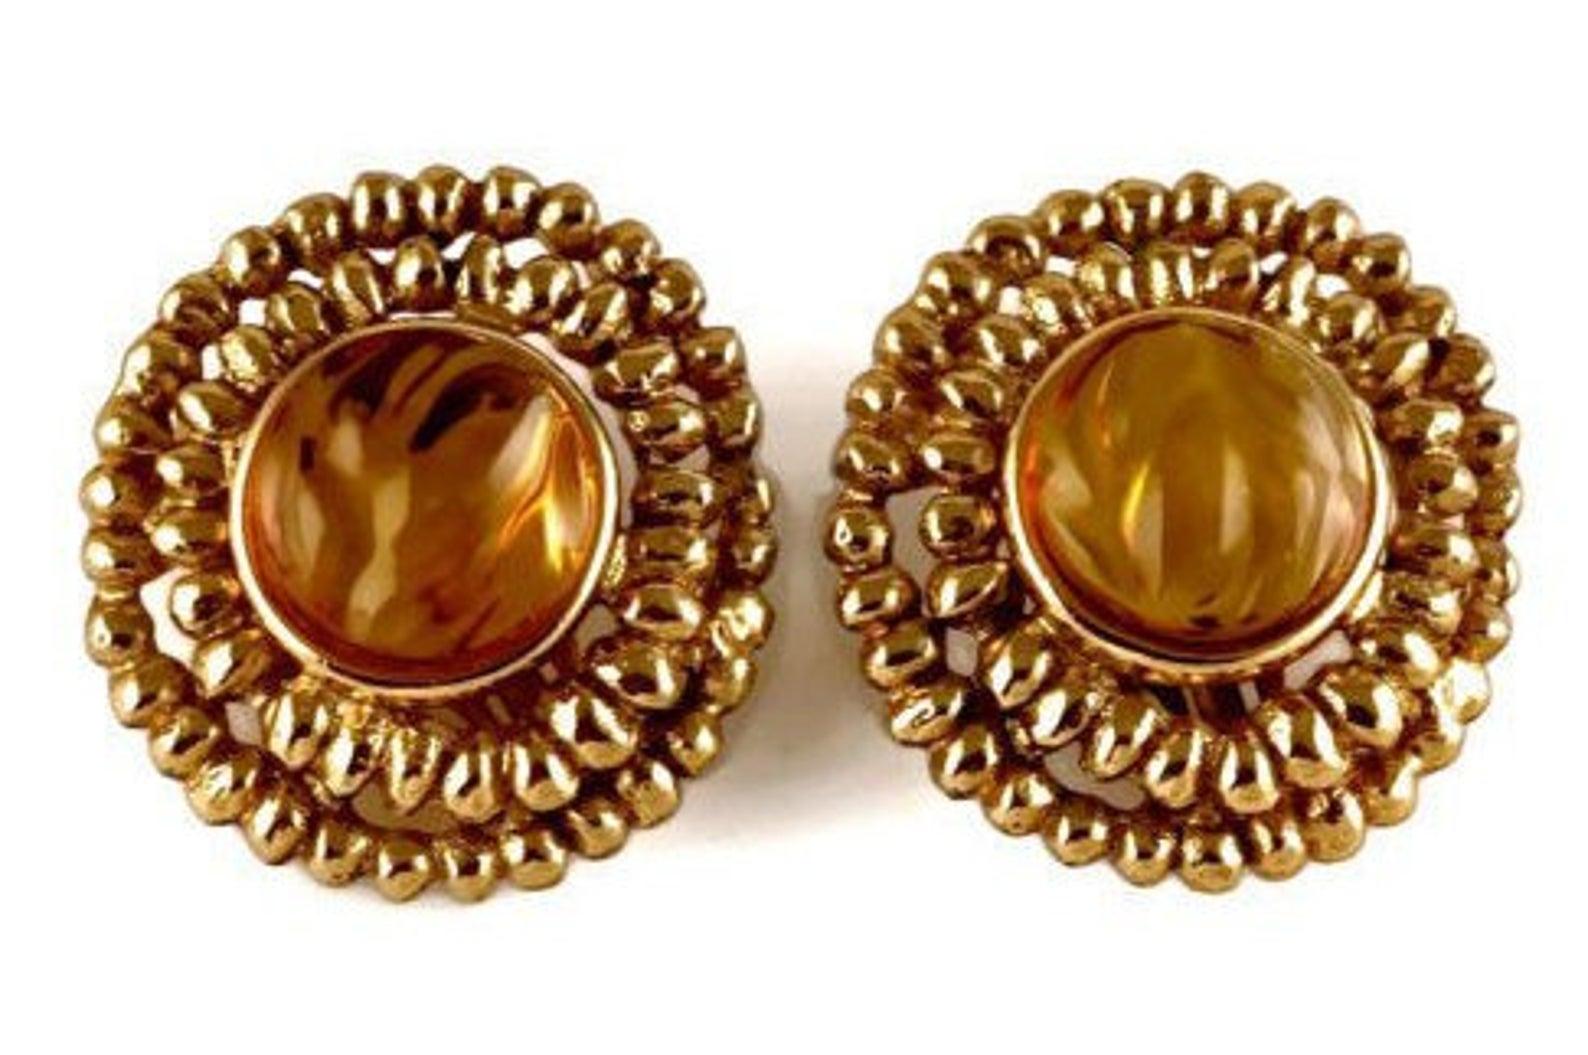 Vintage YSL Yves Saint Laurent Amber Resin Poured Disc Medallion Earrings

Measurements:
Height: 1 5/8 inches (4.12 cm)
Width: 1 4/8 inches (3.81 cm)

Features:
- 100% Authentic YVES SAINT LAURENT.
- Dramatic irregular depth poured resin in amber.
-